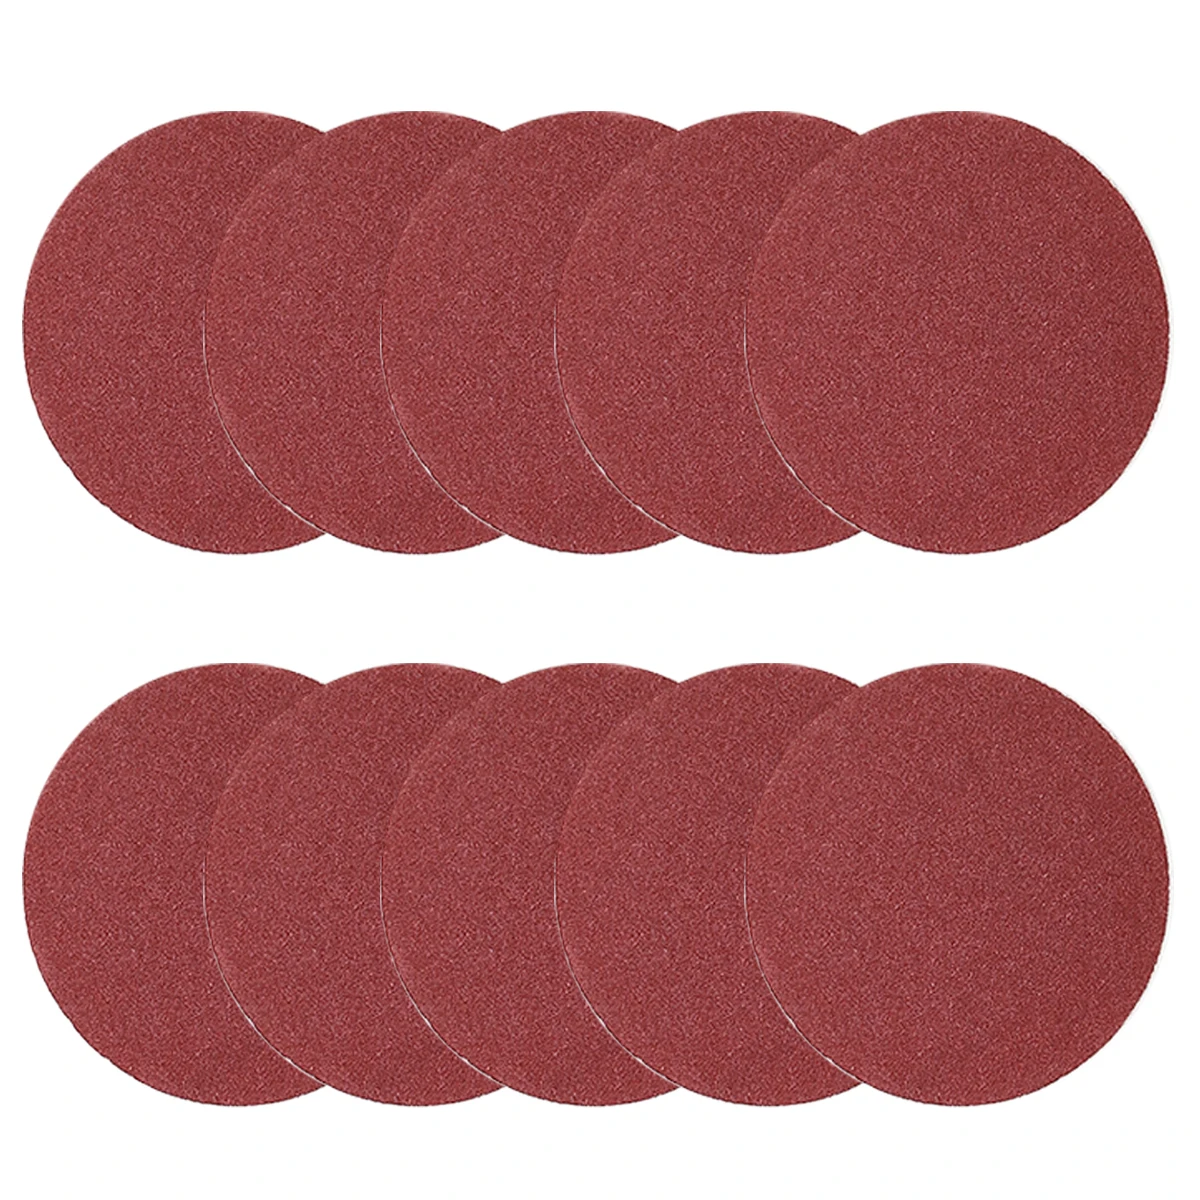 

10Pcs 60/80/120/240 Grit 5inch 125mm Sanding Discs Drill Angle Grinder Mount Rubber Pad Sander with M14 Pad For Abrasive Tools